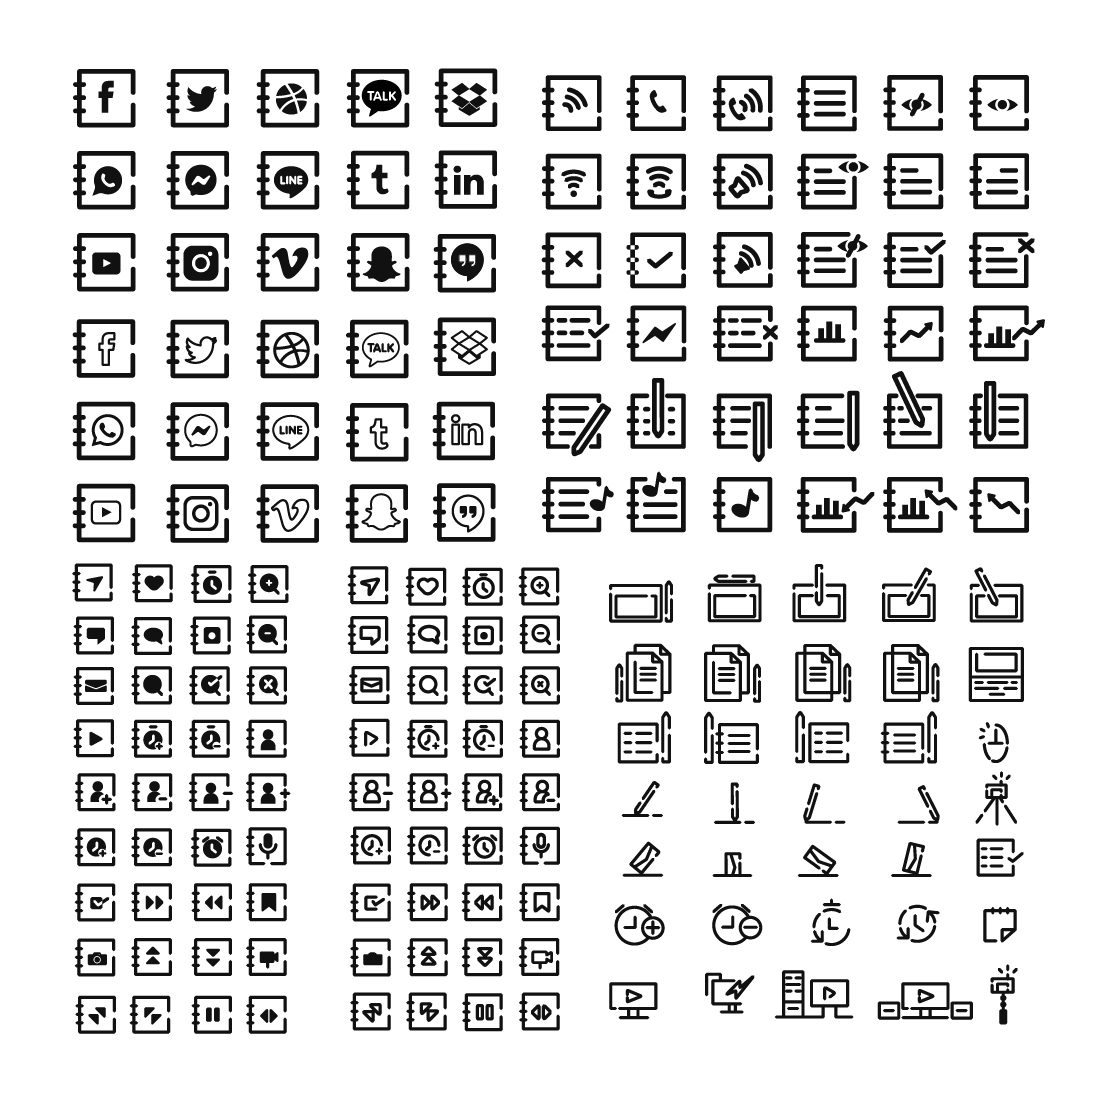 Large set of computer icons and symbols.